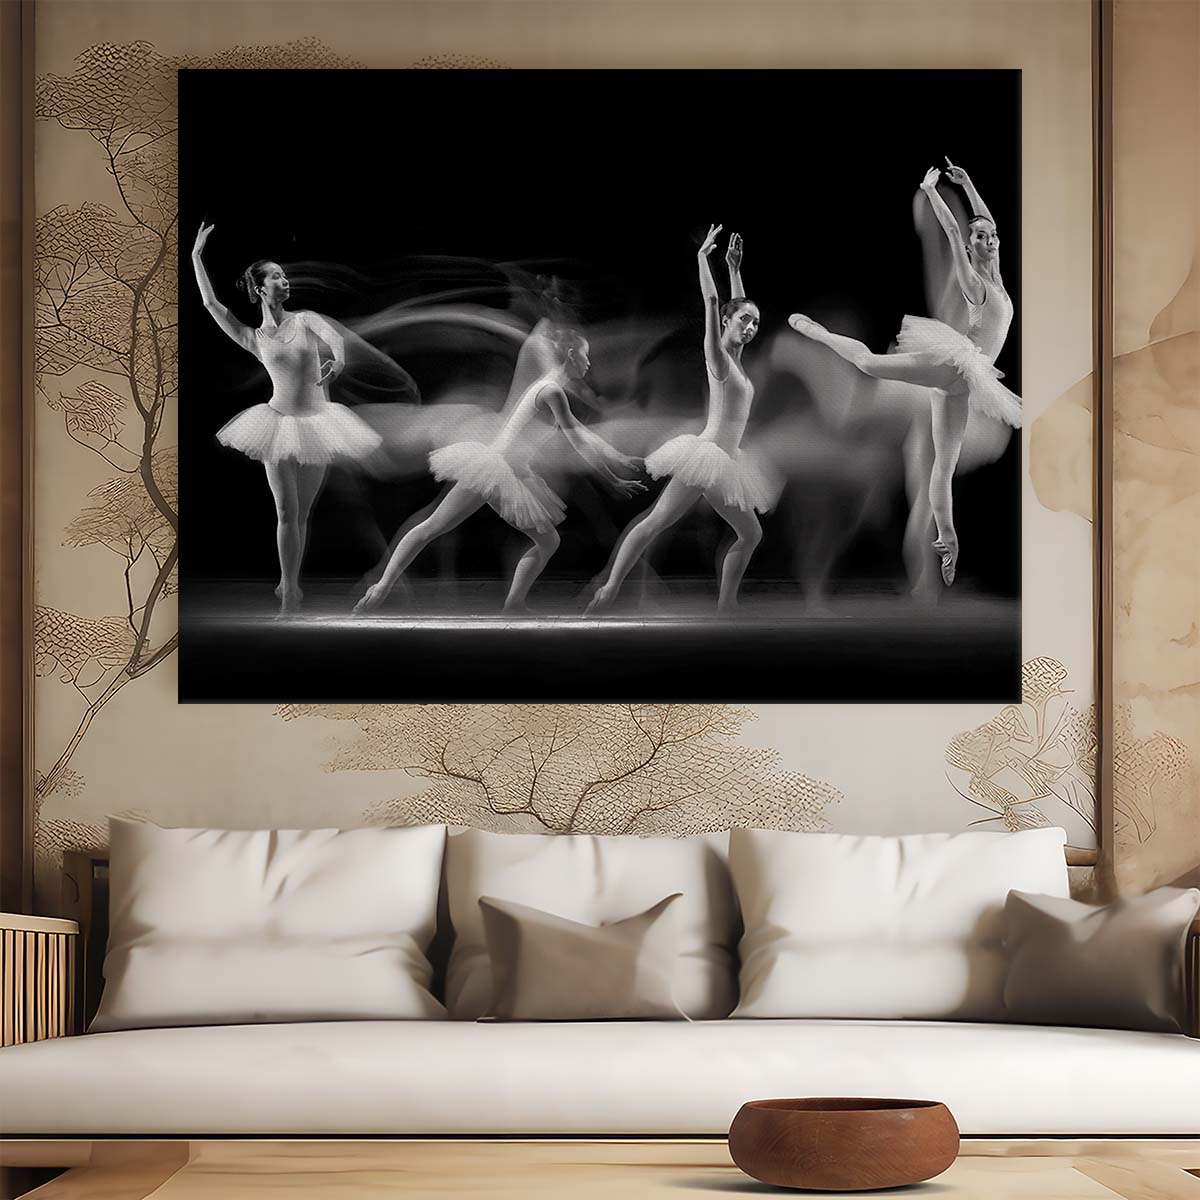 Ballerina Leap in Monochrome Indonesian Dance Wall Art by Luxuriance Designs. Made in USA.